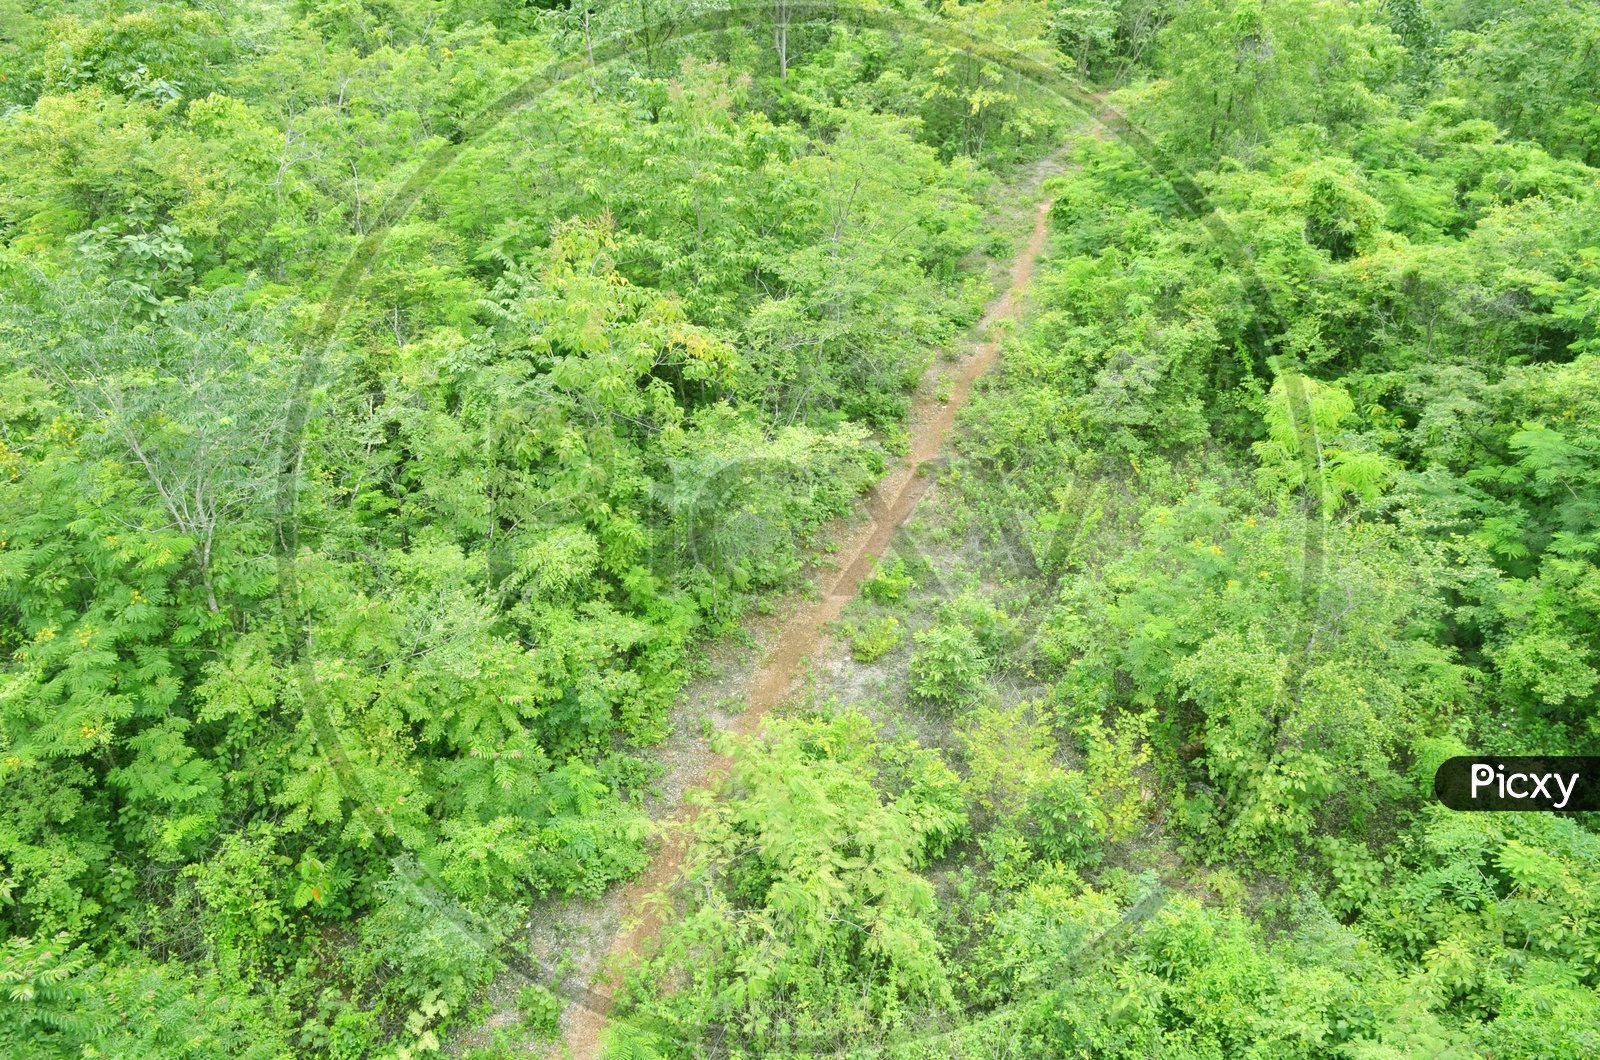 A dirt road along the forest in Thailand